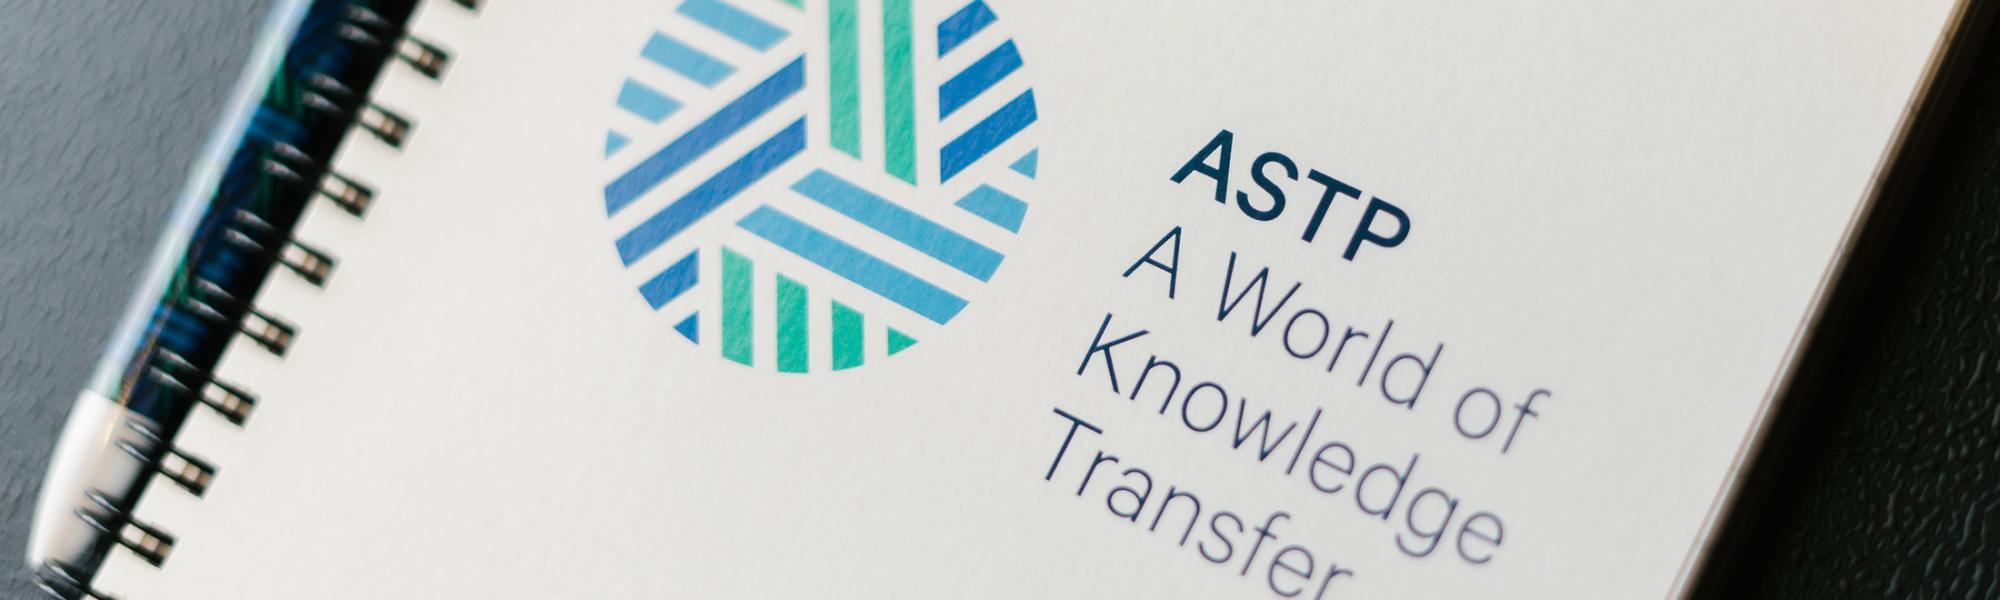 ASTP - Terms & Conditions